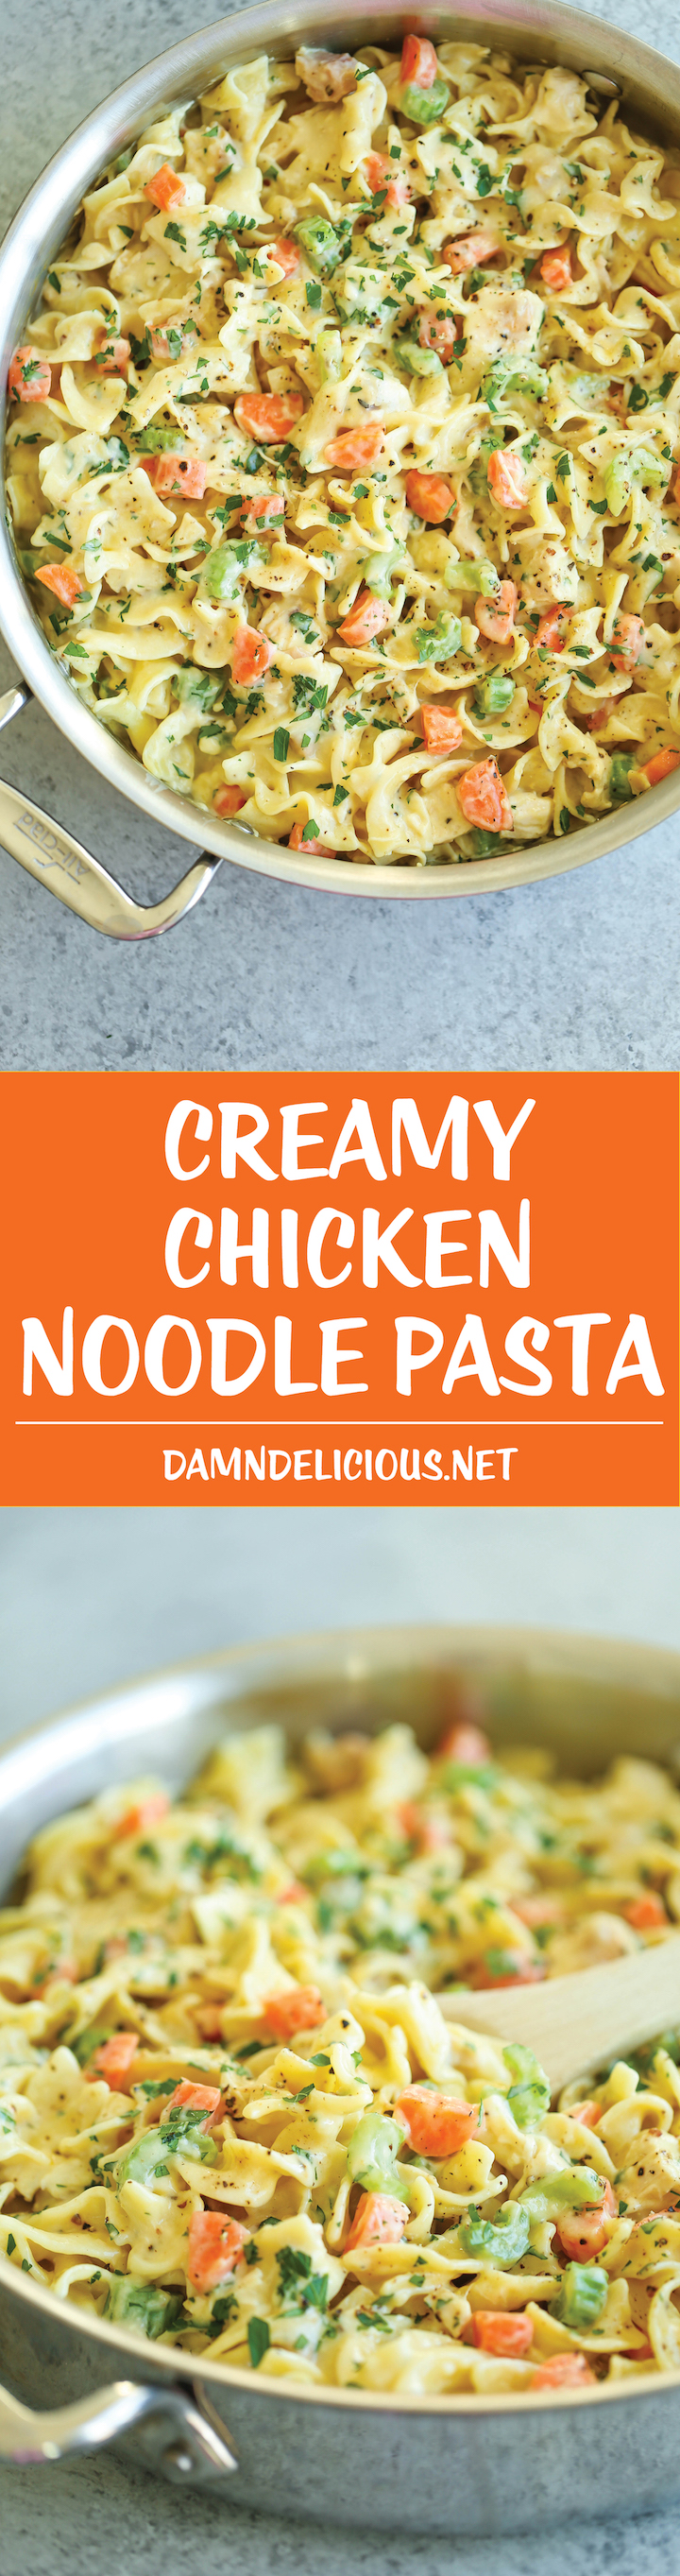 Creamy Chicken Noodle Pasta - This is like everyone's favorite chicken noodle soup except in creamy, melt-in-your-mouth pasta form! It's seriously AMAZING.